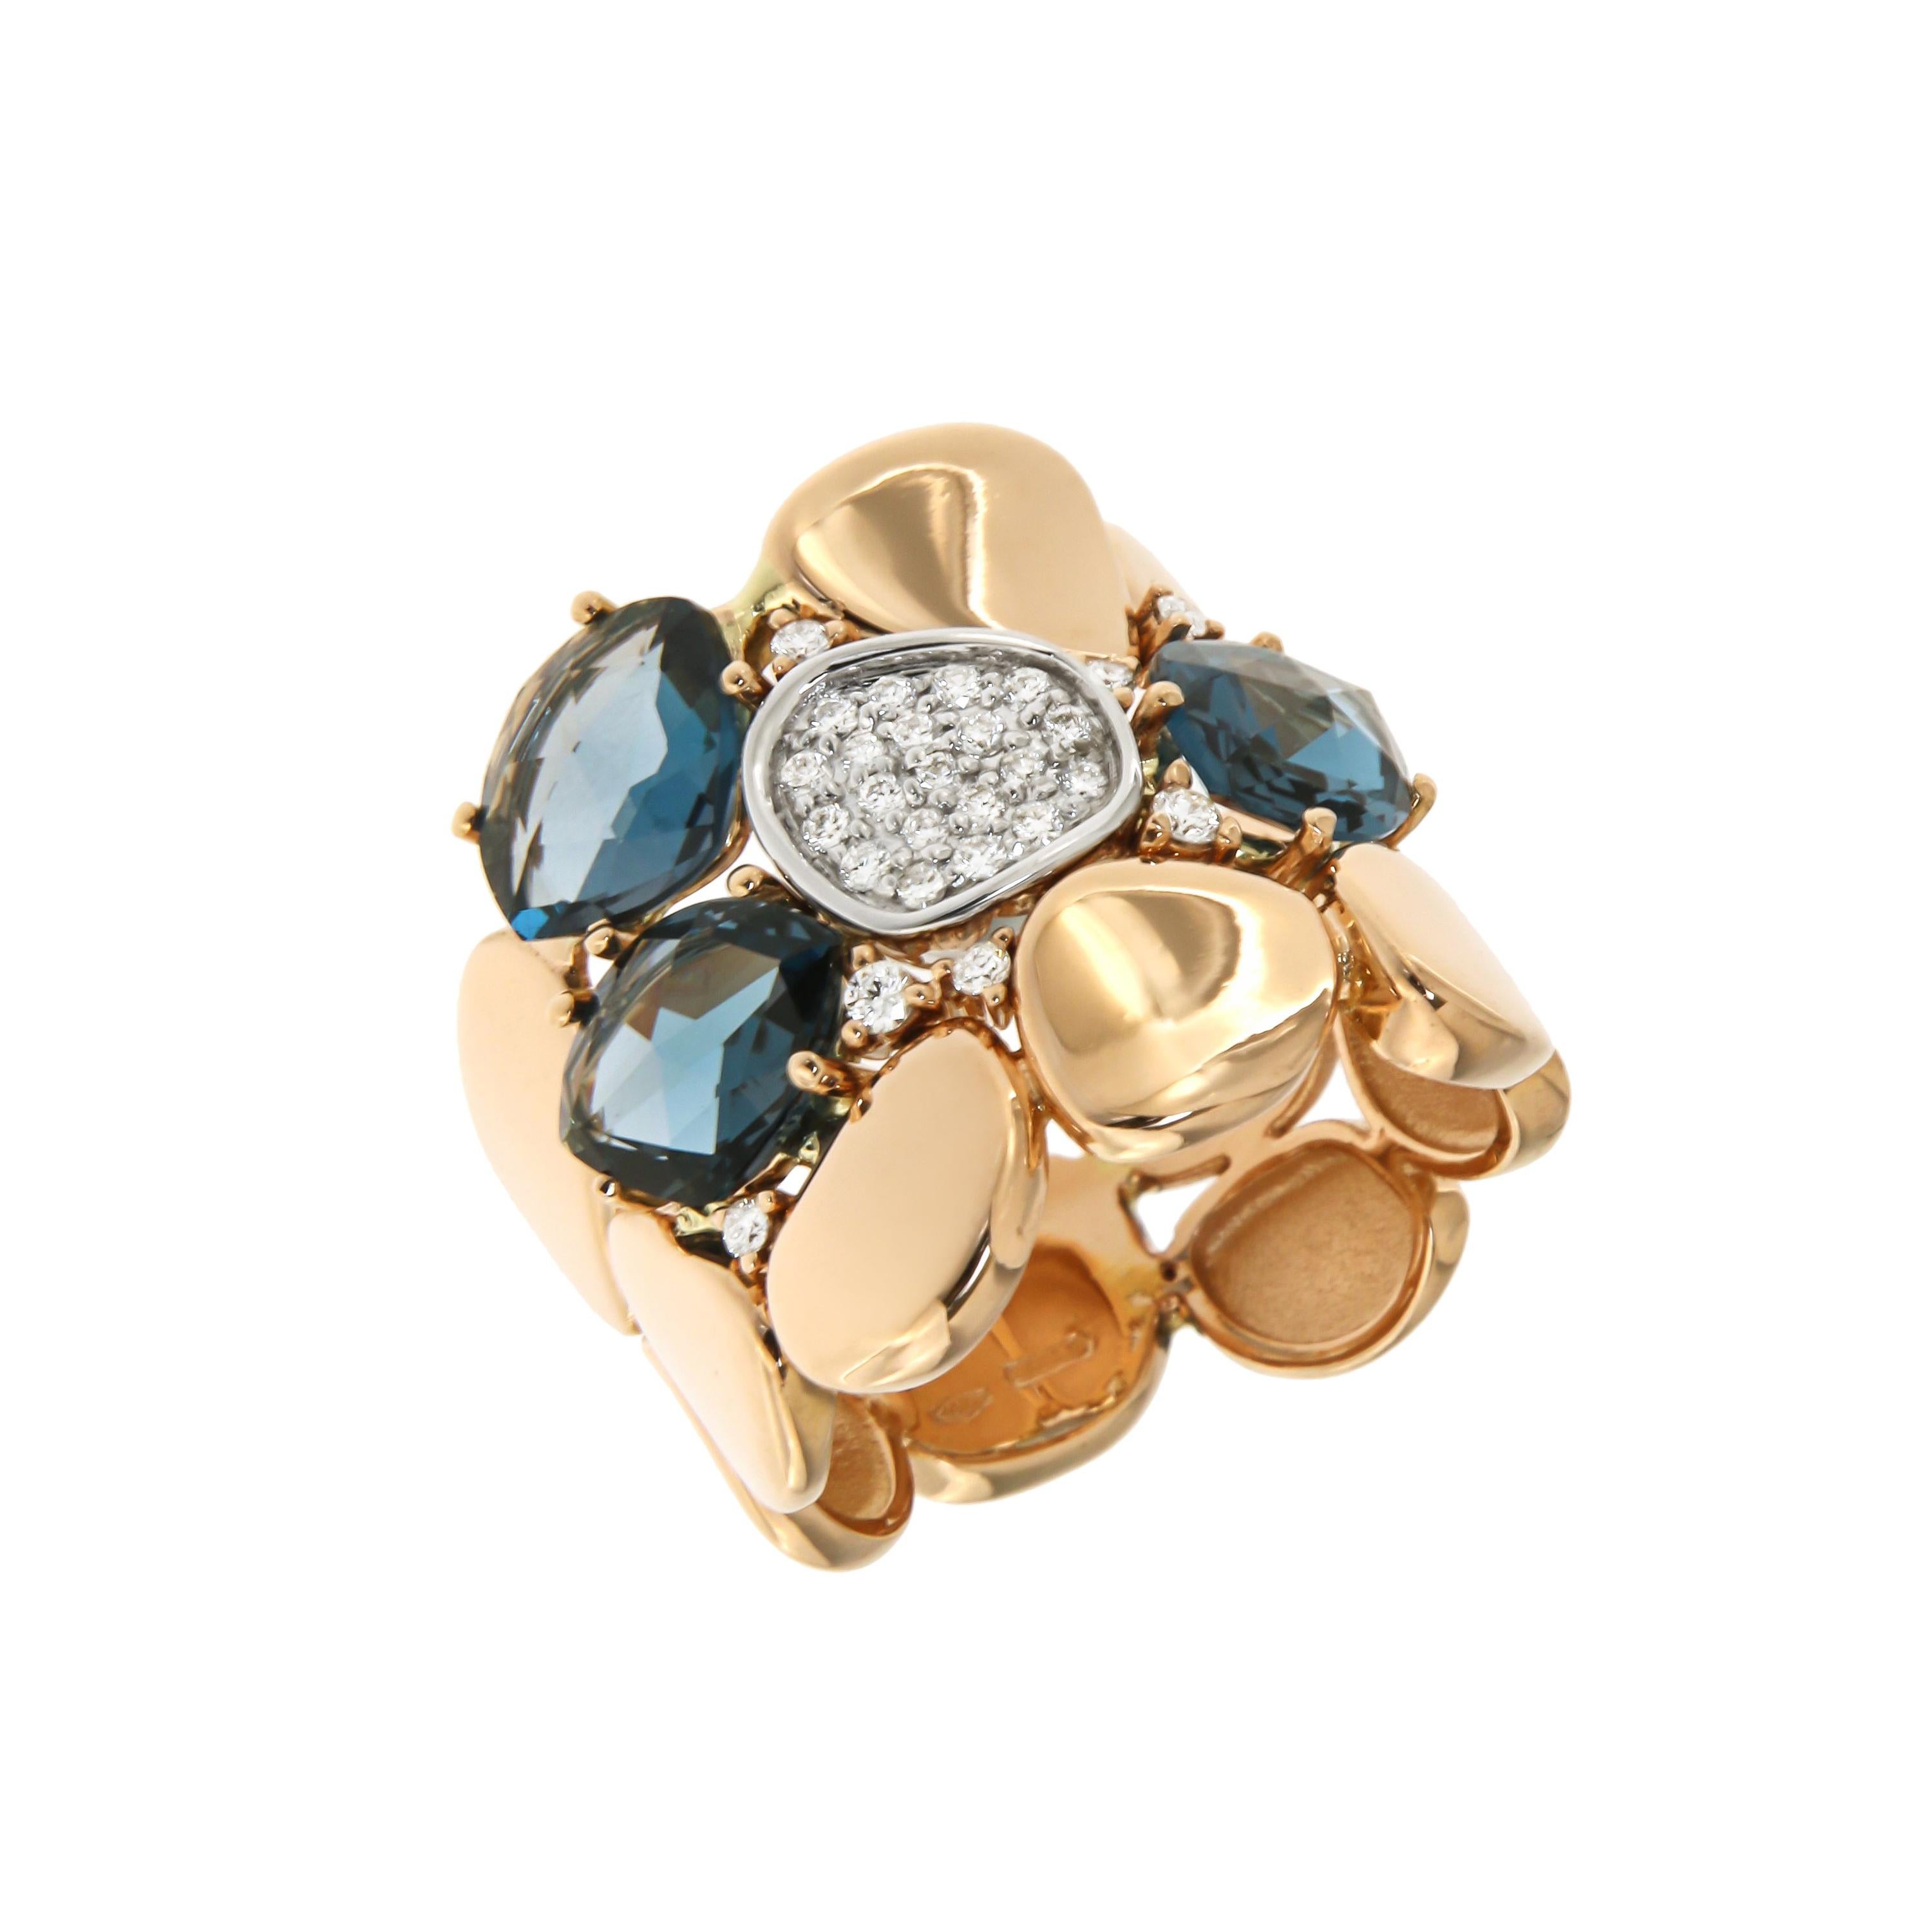 Gorgeous Barocco Style 18k London Blue Topaz Diamonds Rose Gold Ring for Her For Sale